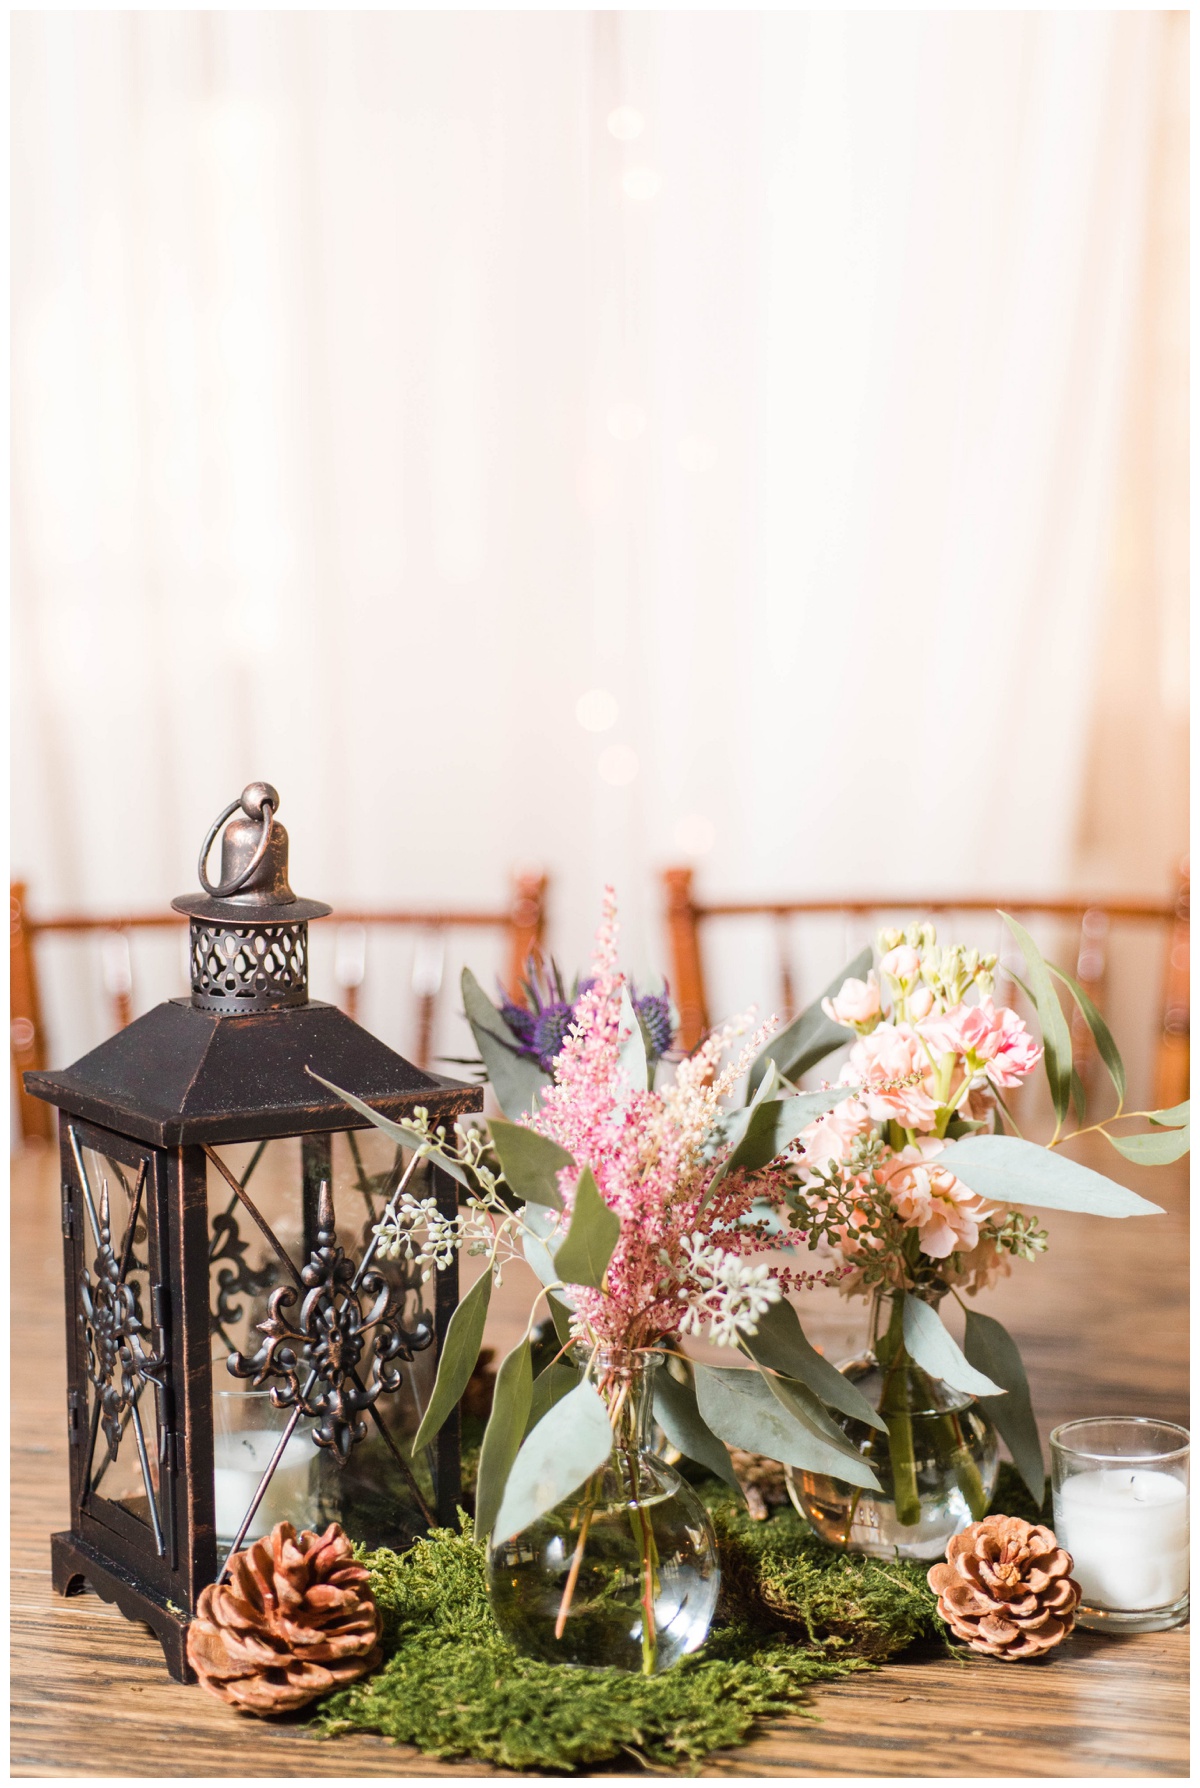 Whimsical Woodland Fall Wedding at mountain memories at thorpewood in thurmont maryland in october by sarah & dave photography richmond wedding photographer woodland forest inspired wedding reception decorations decor lantern pinecone table centerpiece wedding flower arrangement